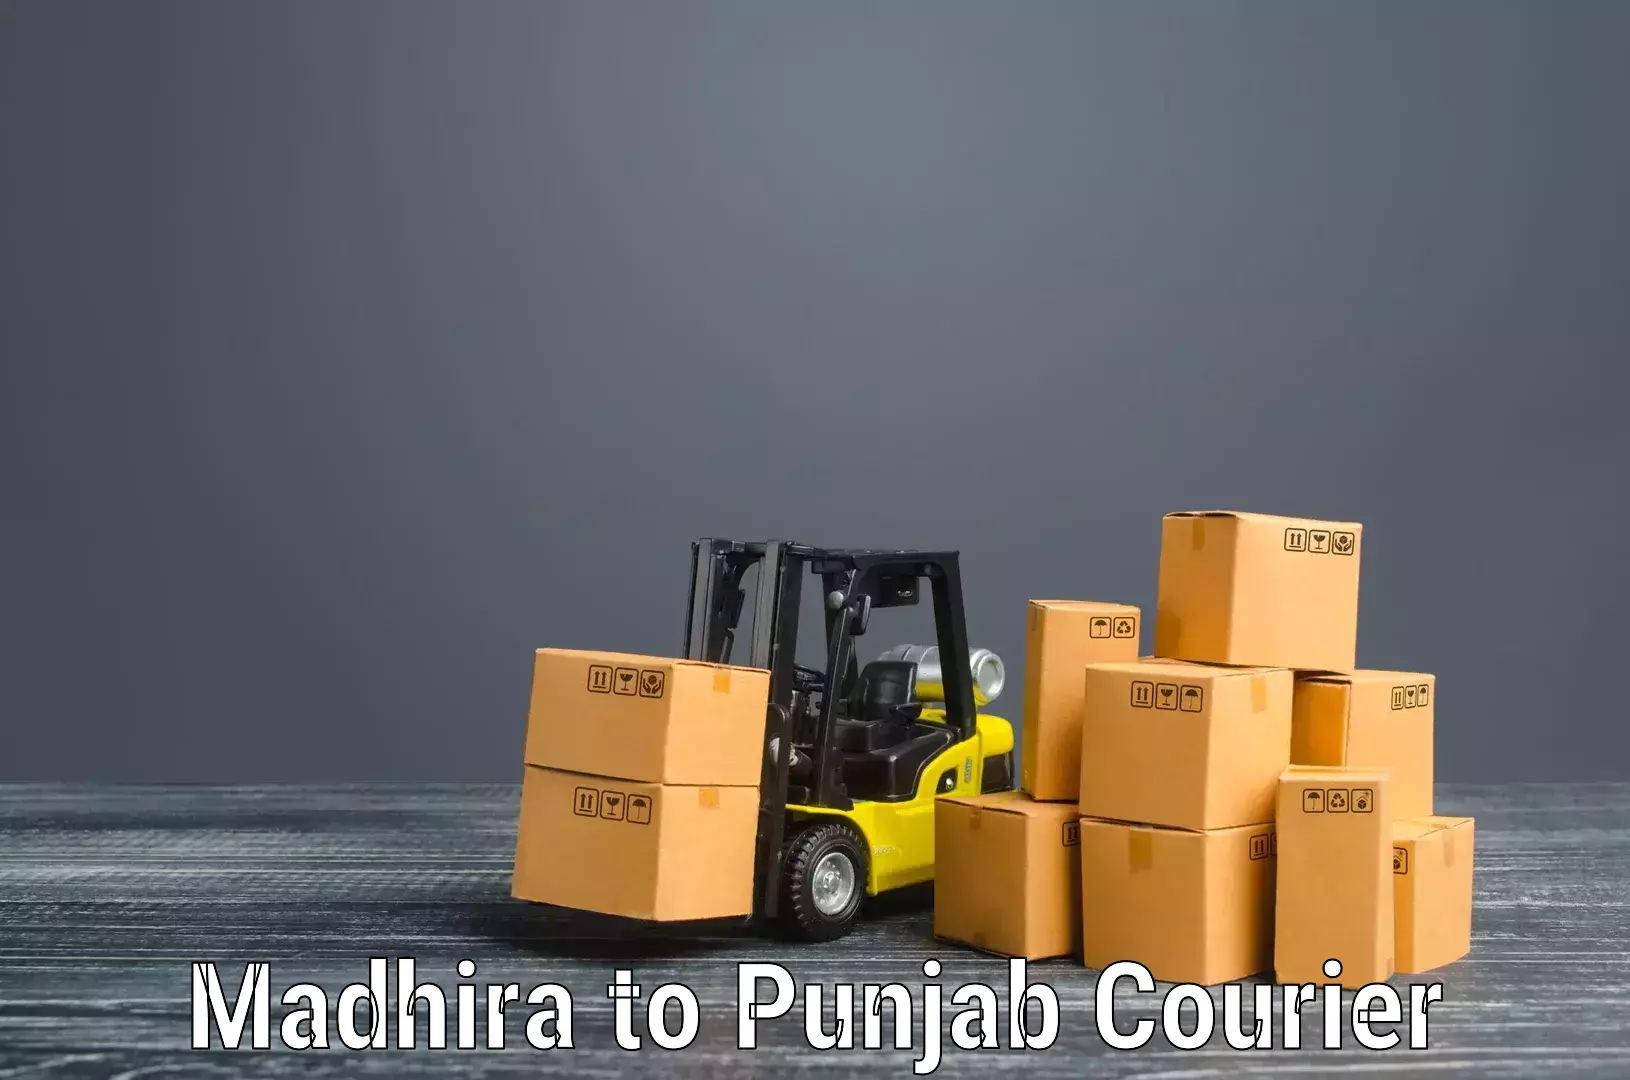 Moving and storage services Madhira to Sultanpur Lodhi